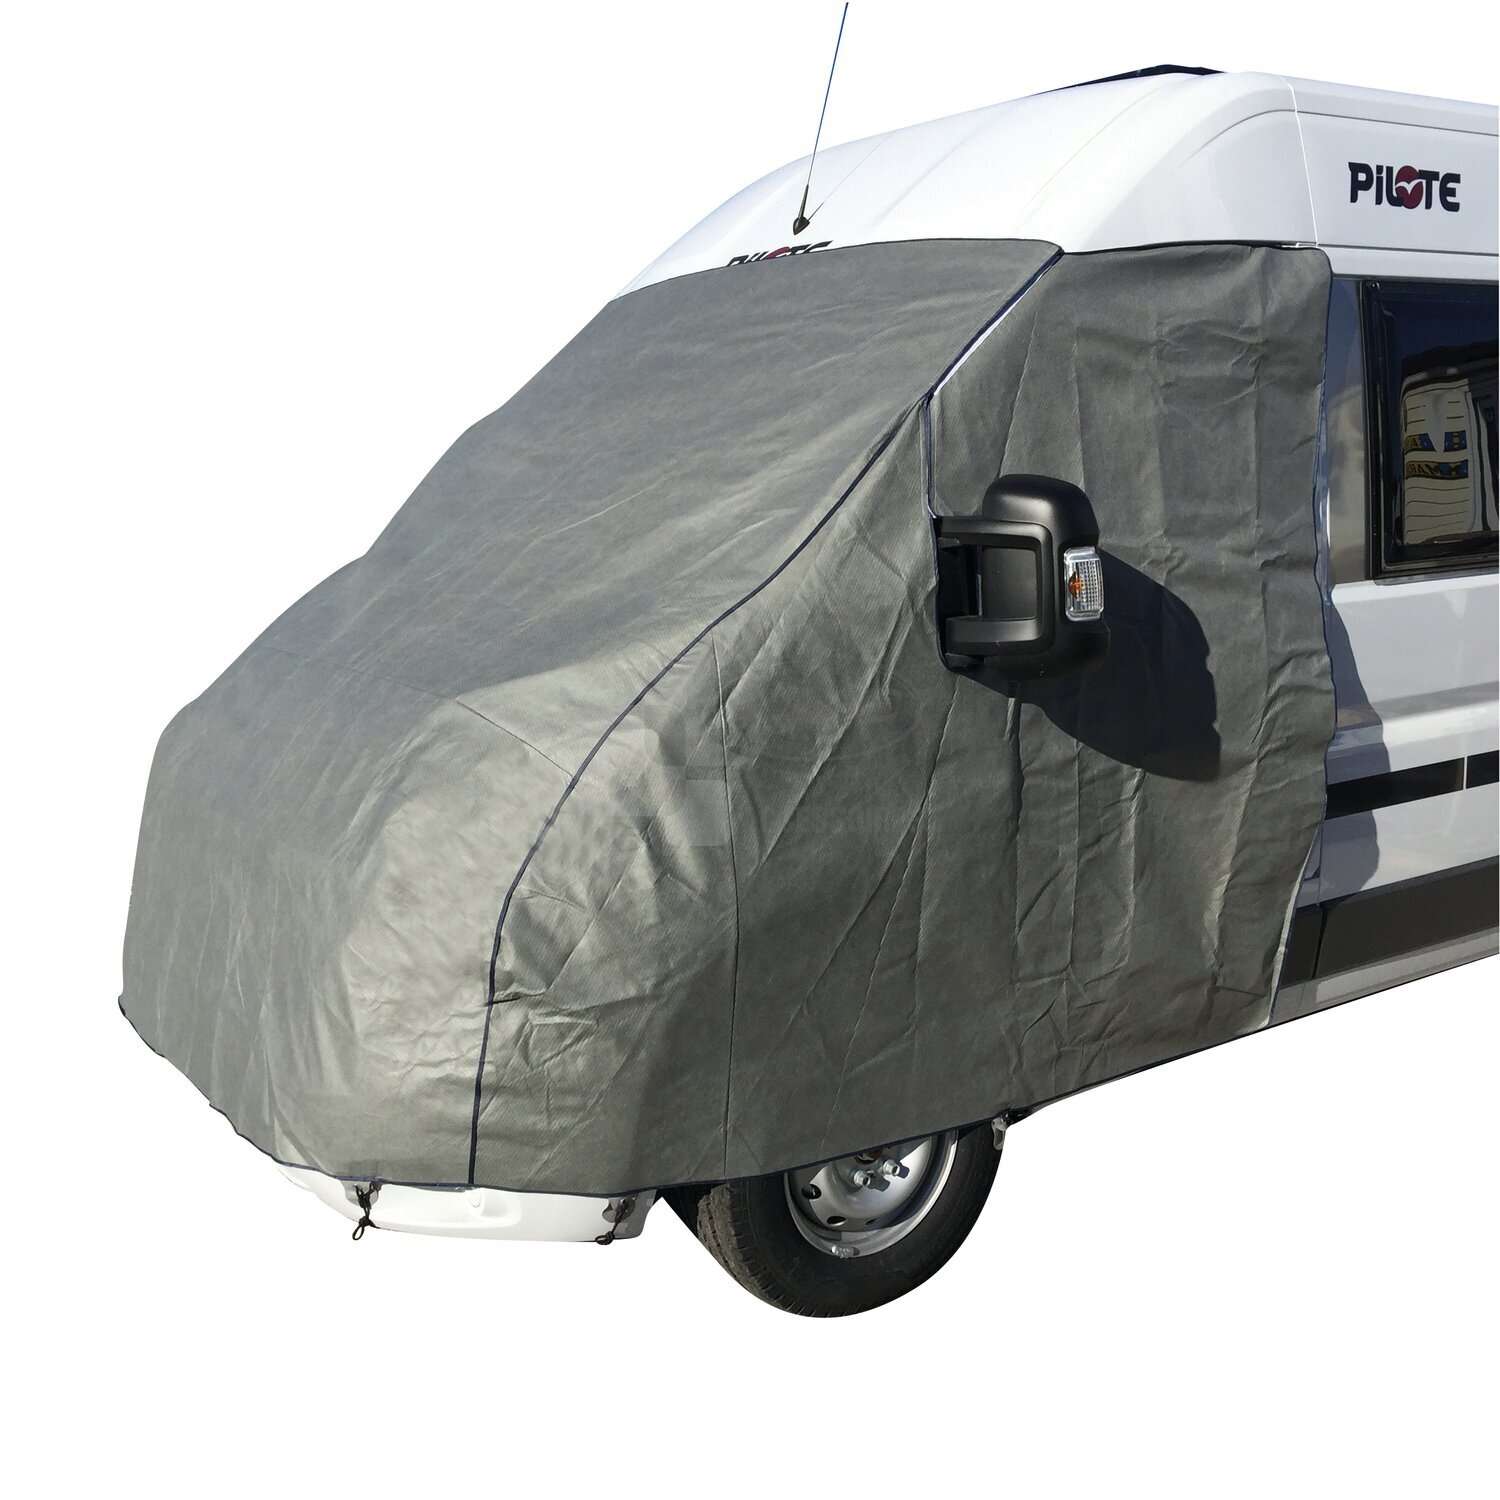 Housse protection camping-car capucine - Bâche TYVEK® TOP COVER